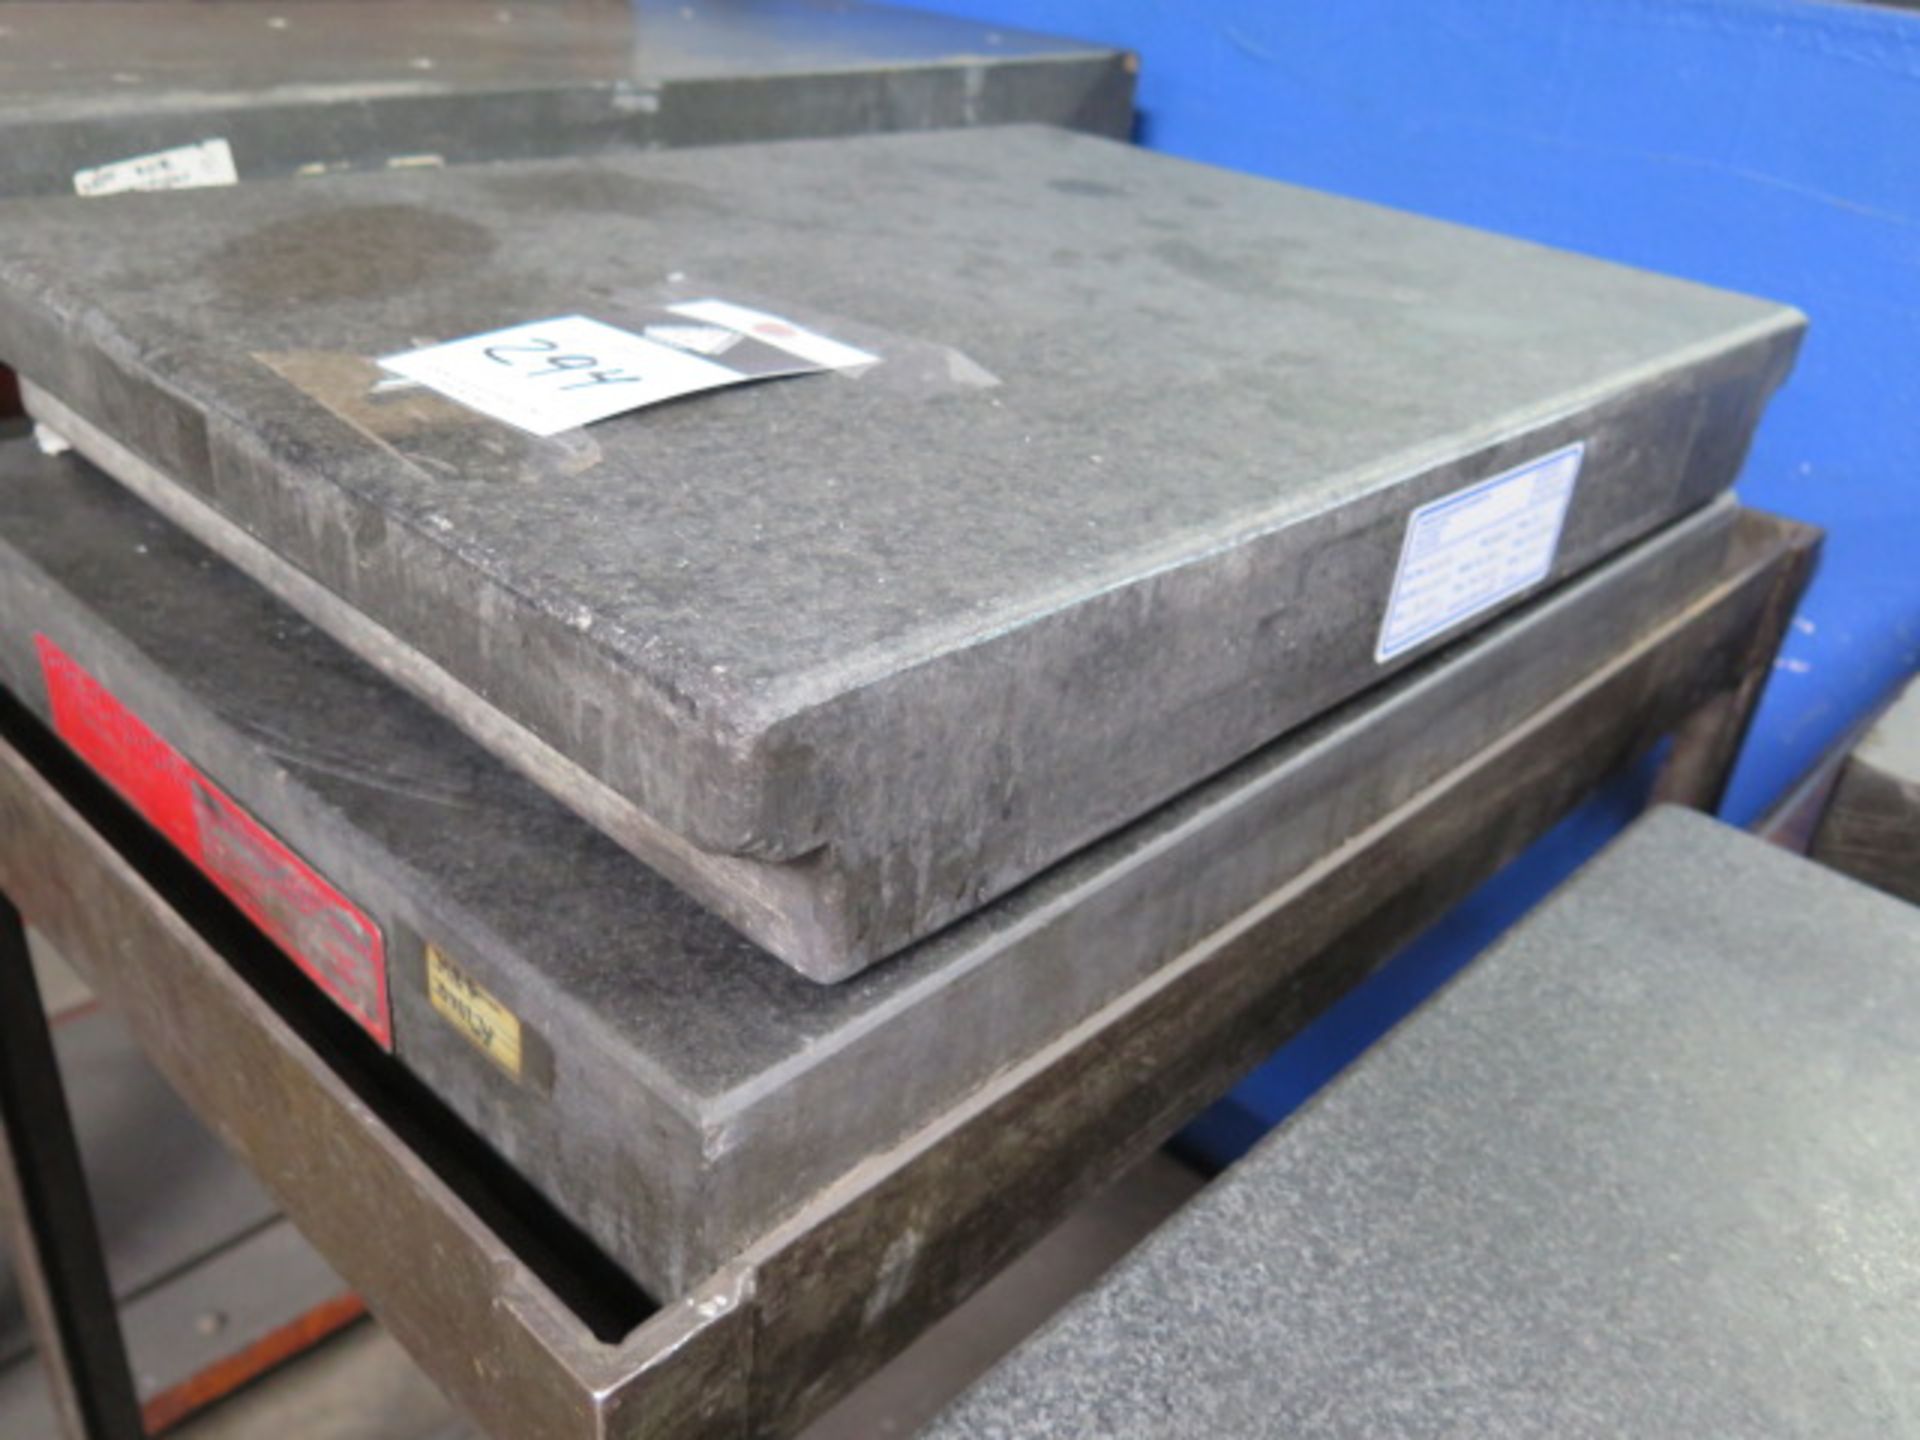 18" x 24" x 3" Granite Surface Plates (2) w/ Cart (SOLD AS-IS - NO WARRANTY) - Image 3 of 5